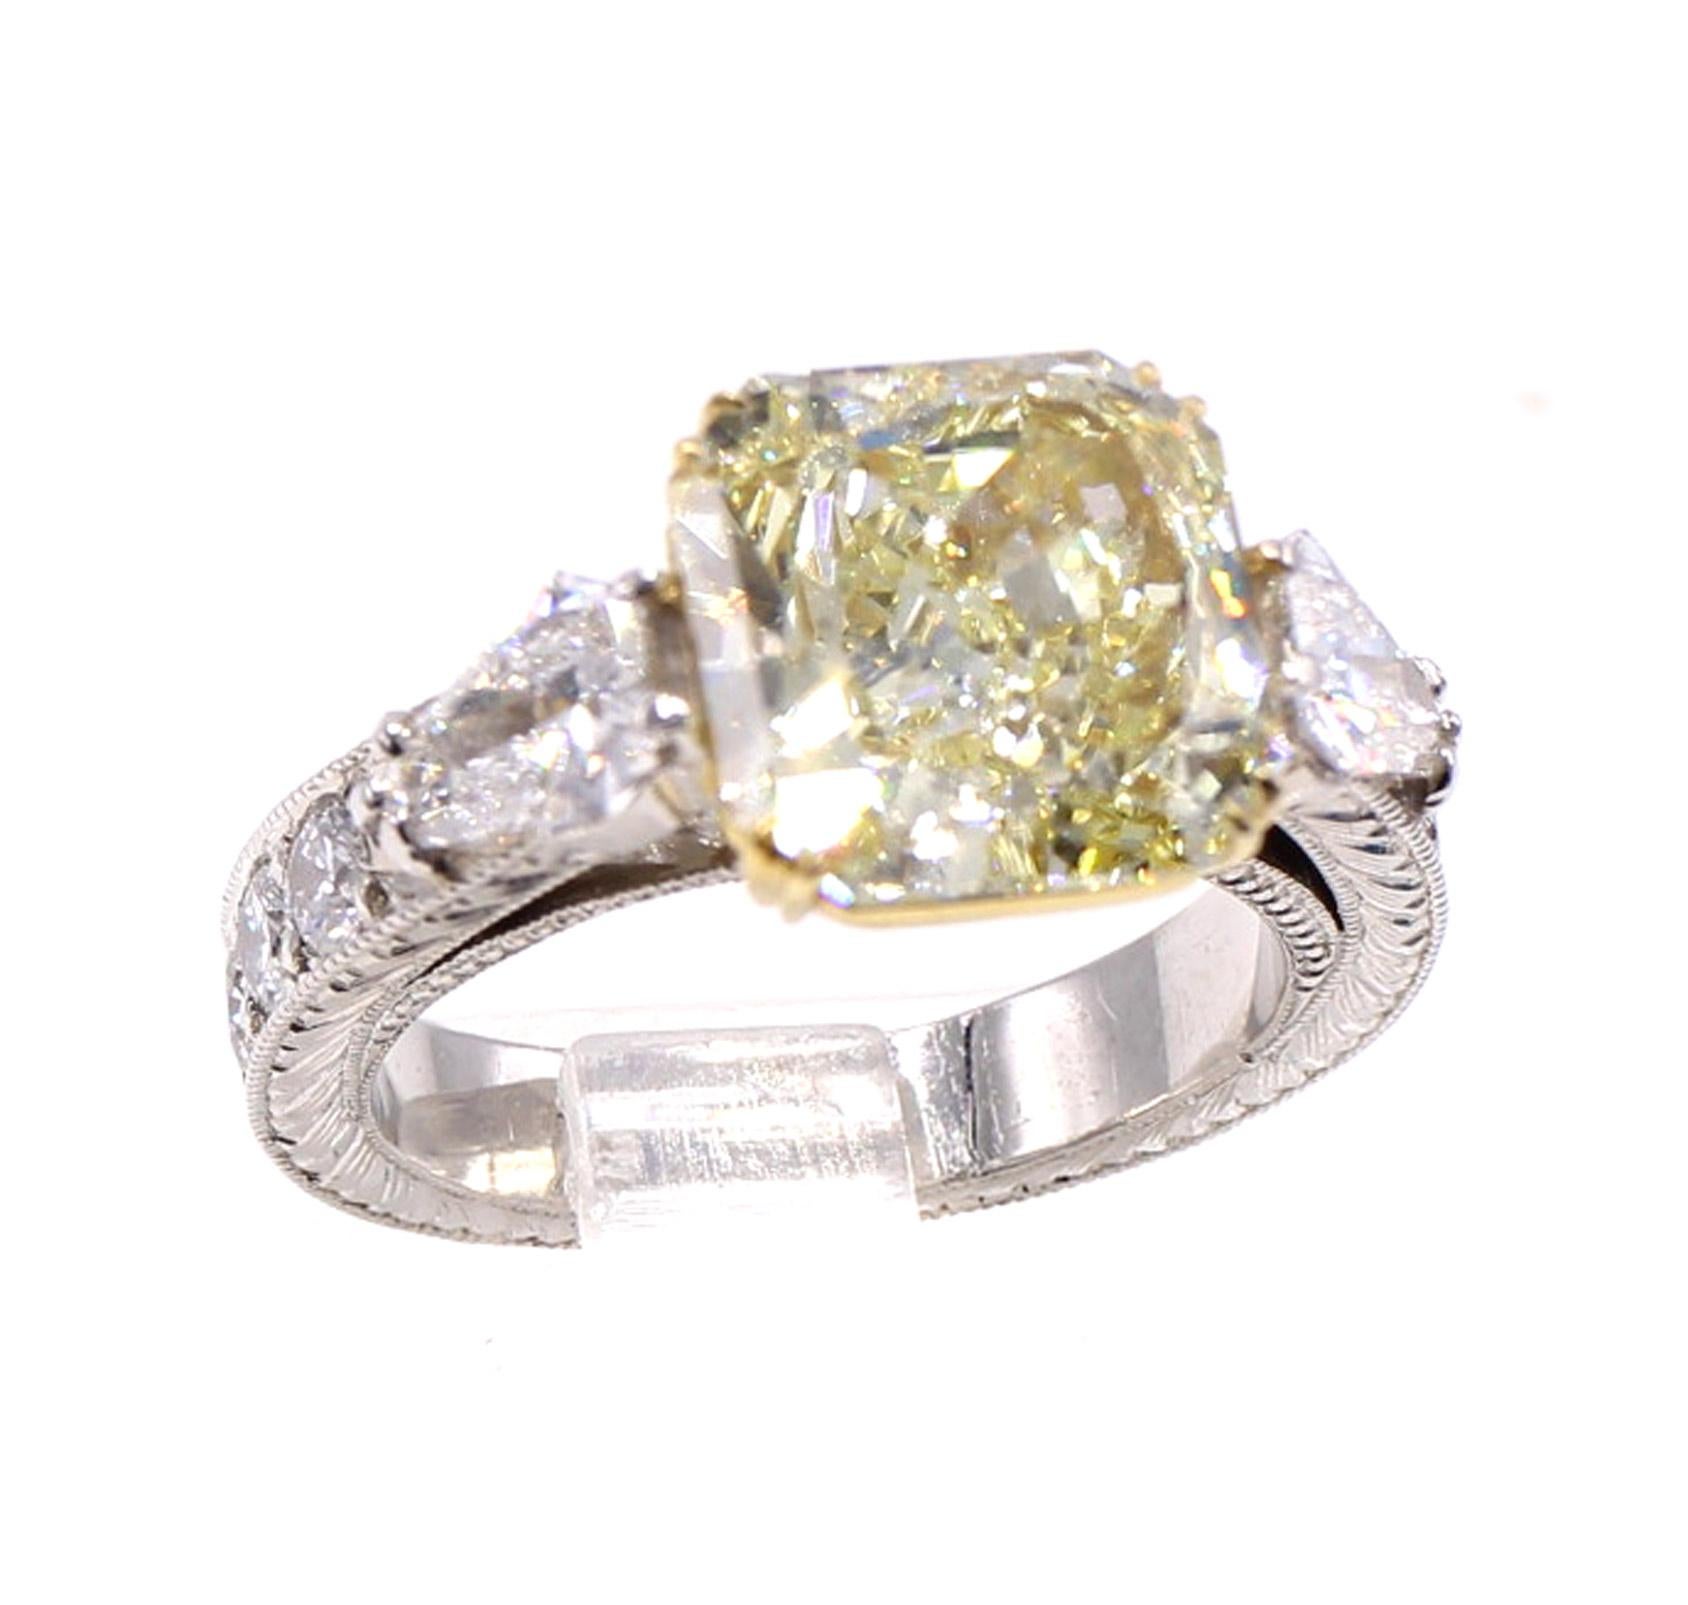 The center piece of this beautifully designed and wonderfully handcrafted engagement ring is a lovely lemon colored Natural Fancy Yellow diamond weighing 4.55 carats. With a depth percentage of 56.5 and a diameter of 9.84 by 9.78 millimeters, this